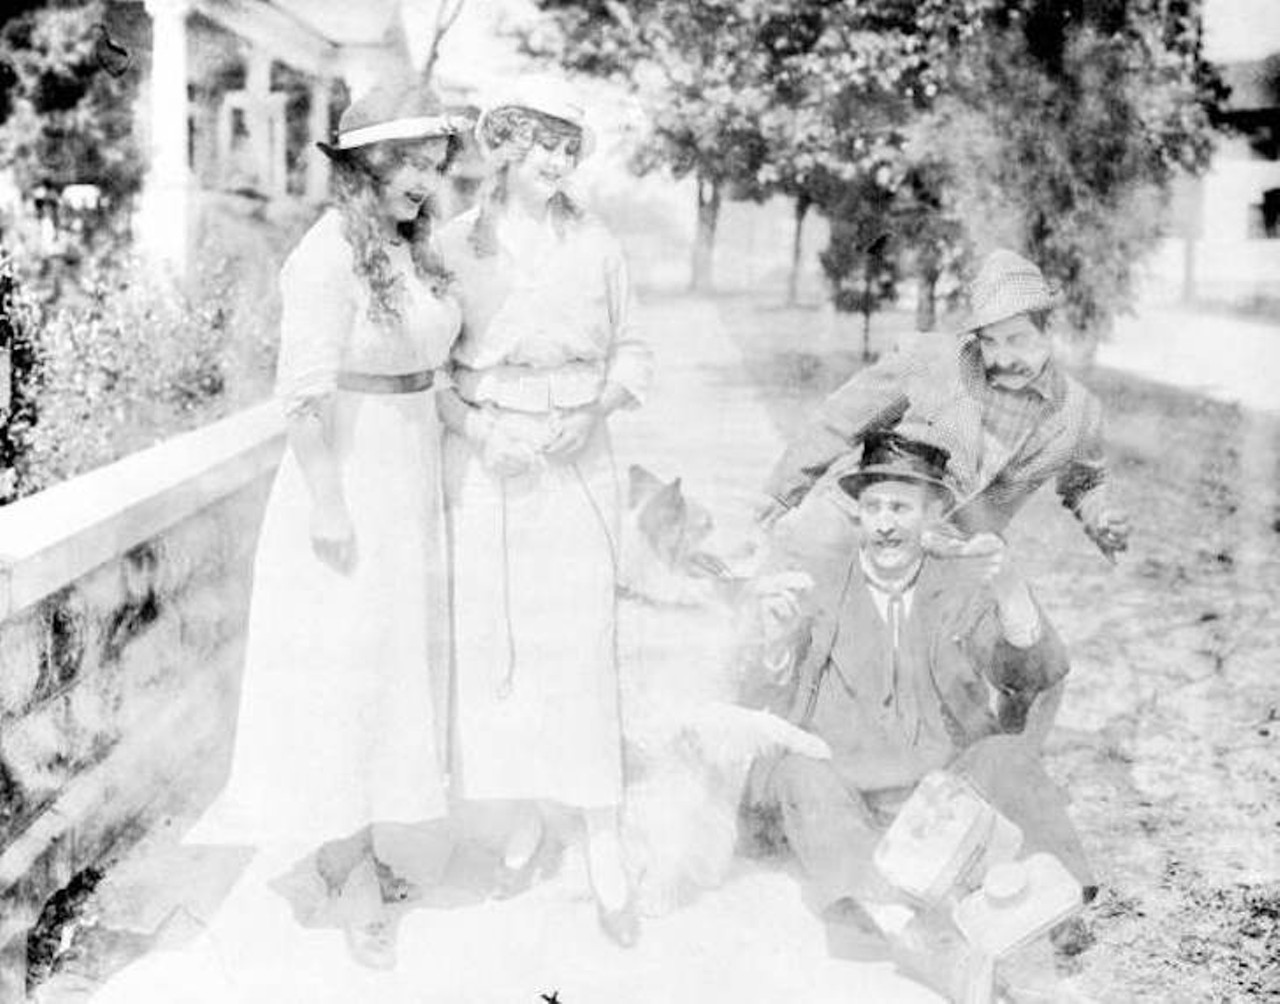 A motion picture scene from 1916, L-R: Pearl Shepard(?), Ethel Burton Palmer, Bobby Burns and Walter Stull. An accompanying note says, "This image was collected by filmmaker William "Billy" Bletcher (1894-1979) while working for the Vim Comedy Company between 1915 and 1917. The small film studio was based in Jacksonville and New York. The company produced hundreds of two-reel comedies (over 156 comedies in 1916 alone). Before going out of business in 1917, it employed such stars as Oliver Hardy, Ethel Burton, Walter Stull, Arvid Gillstrom, and Kate Price."